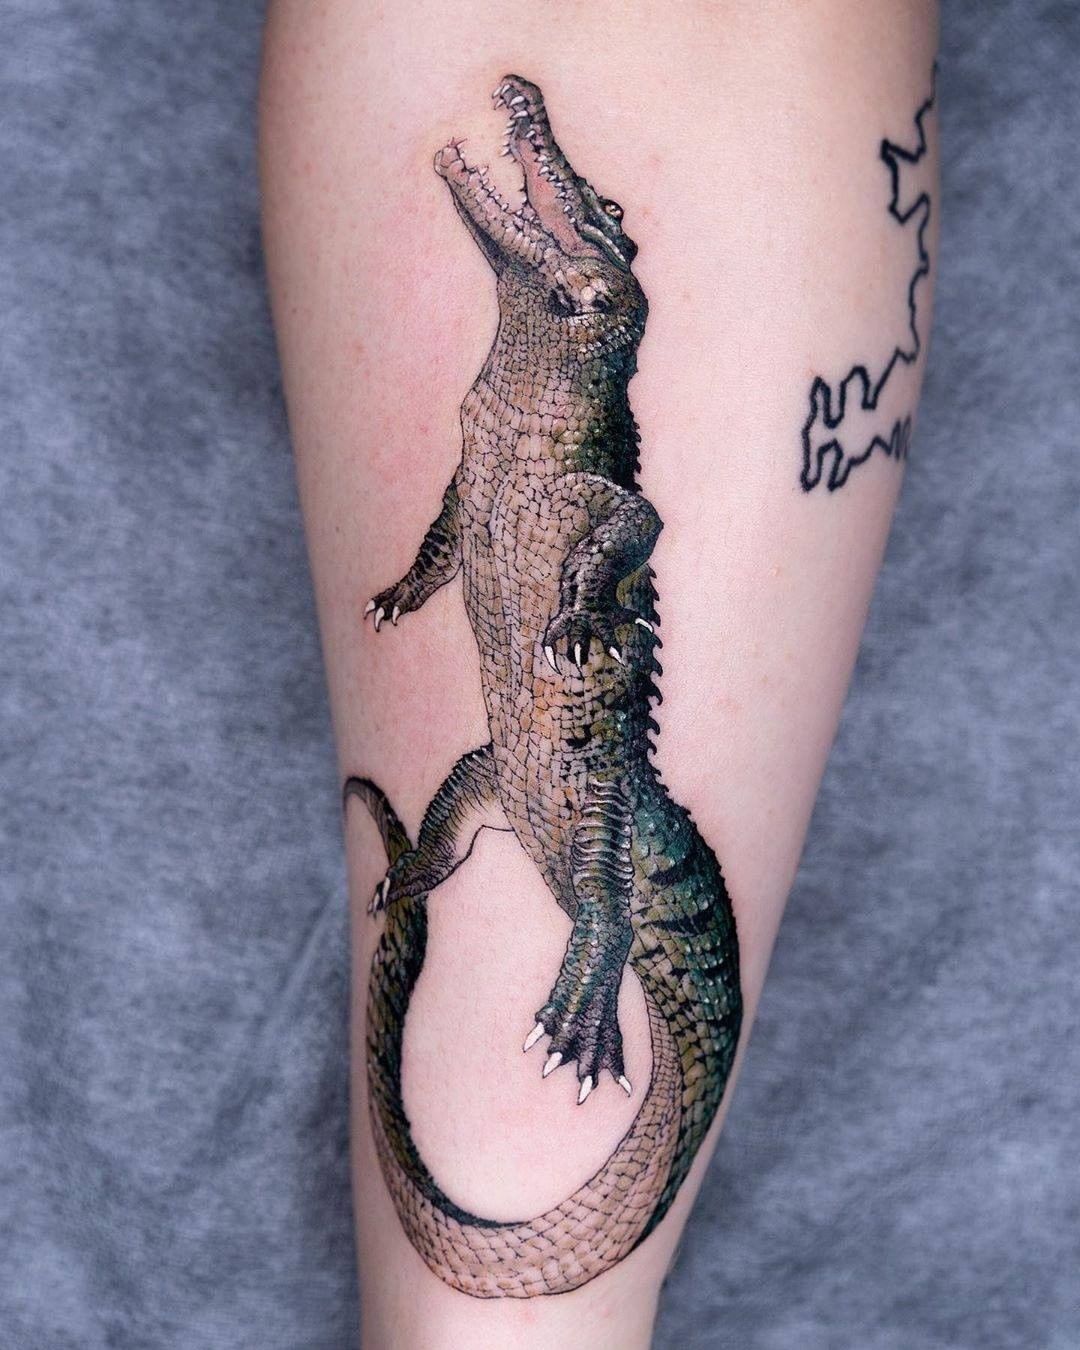 28 Awesome Alligator Tattoo Ideas for Men & Women in 2023